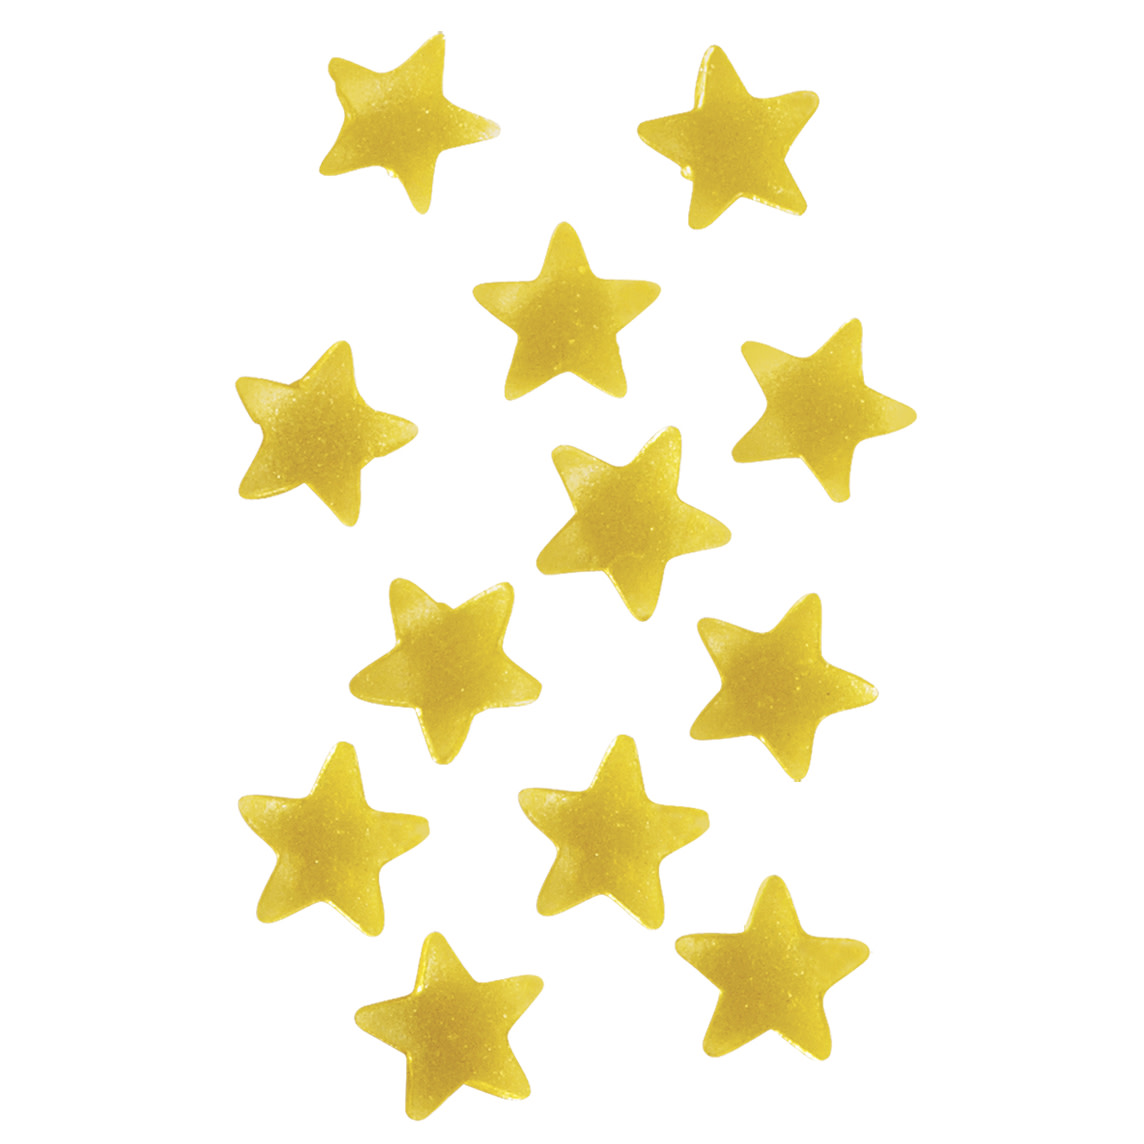 Wilton Gold Stars Edible Accents - image 3 of 9